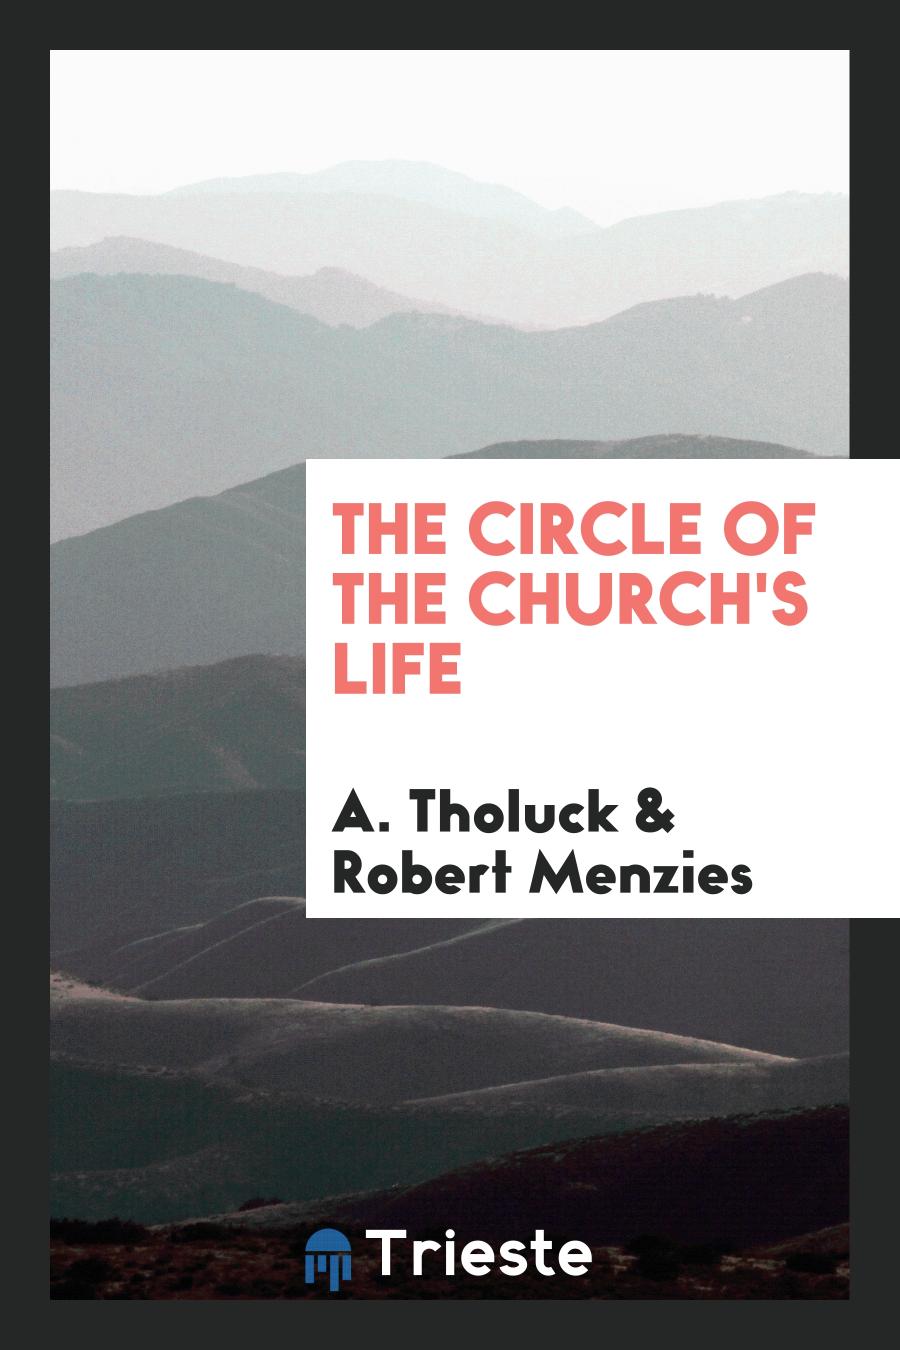 The Circle of the Church's Life